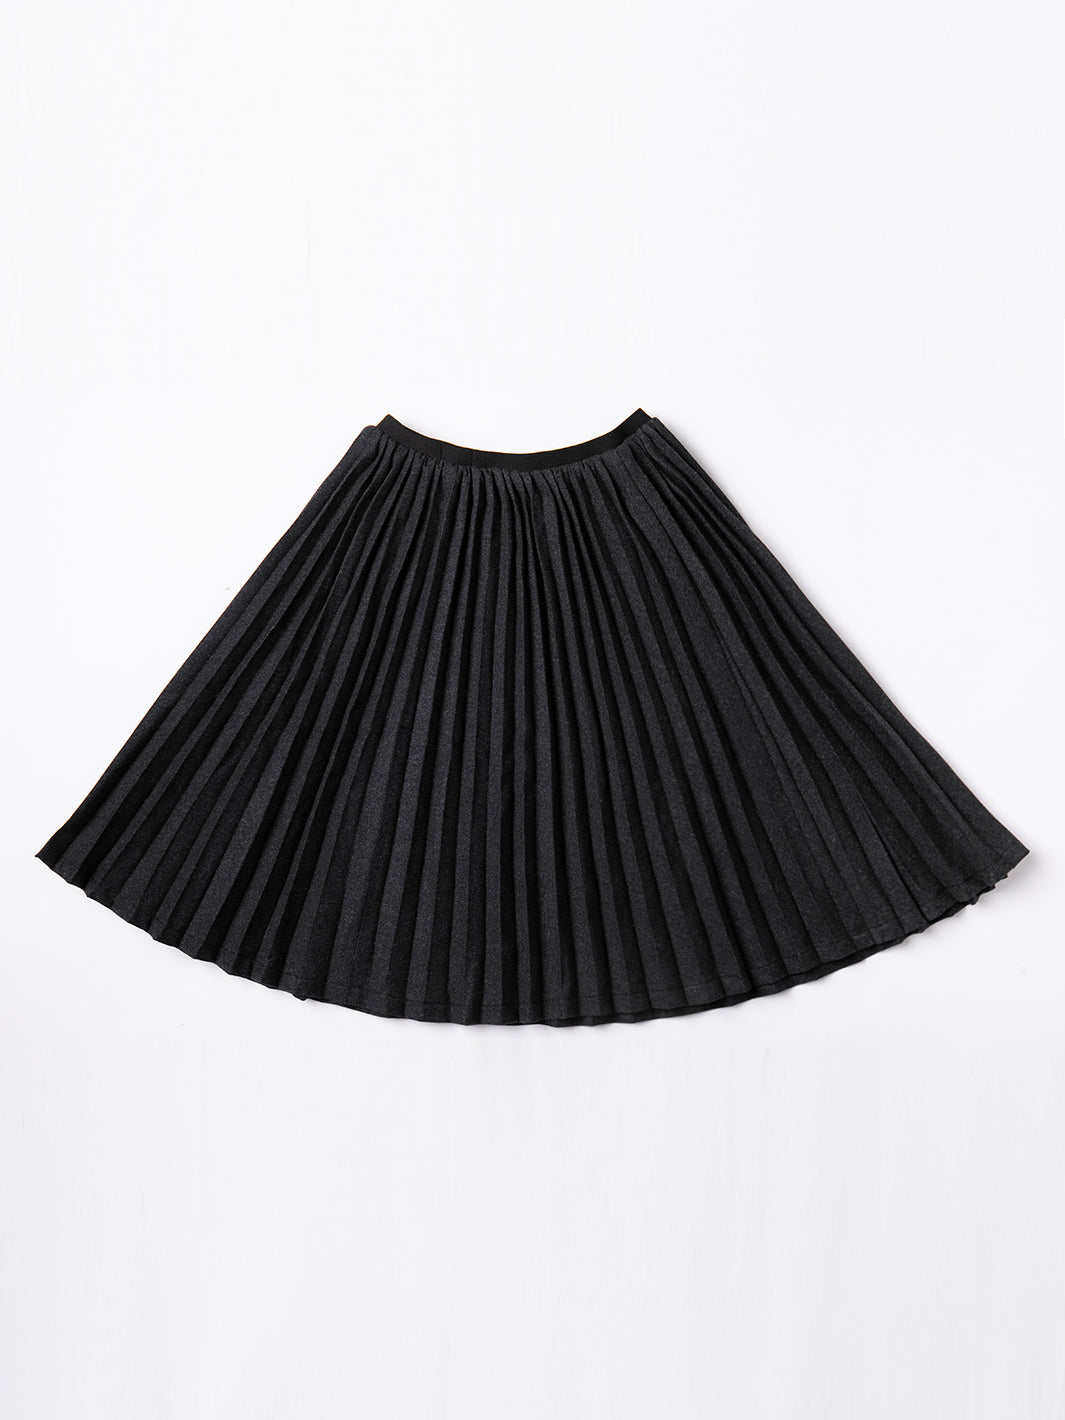 Accordion Pleats Wood Button Skirt - Charcoal